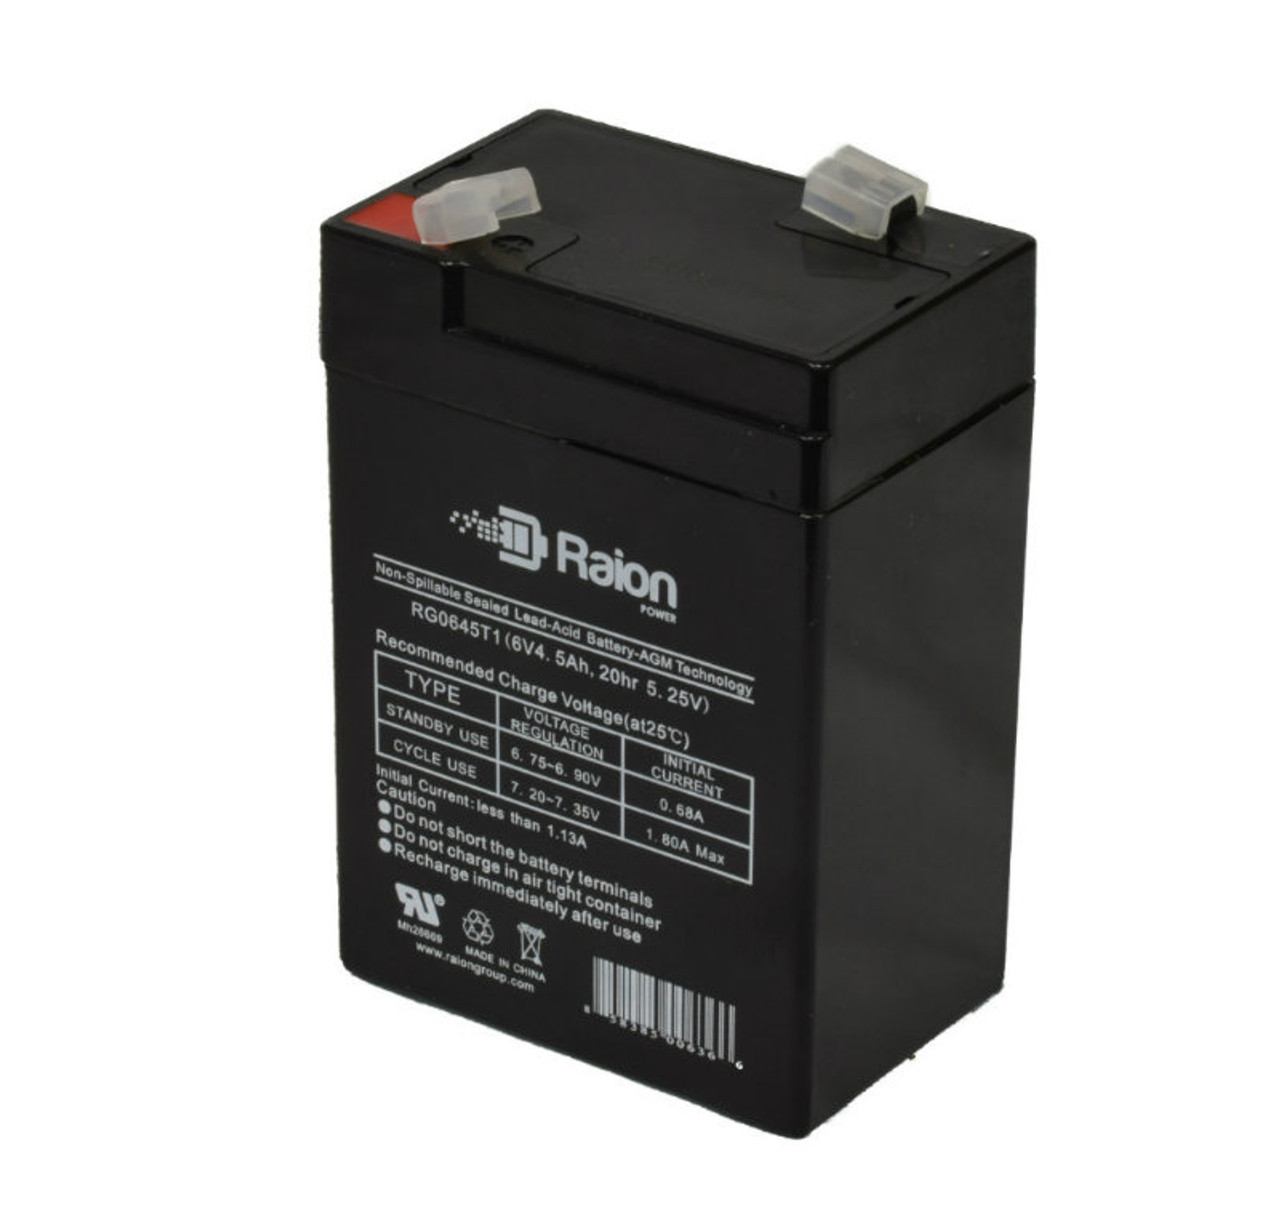 Raion Power RG0645T1 6V 4.5Ah Replacement Battery Cartridge for Motoma MS6V4.5